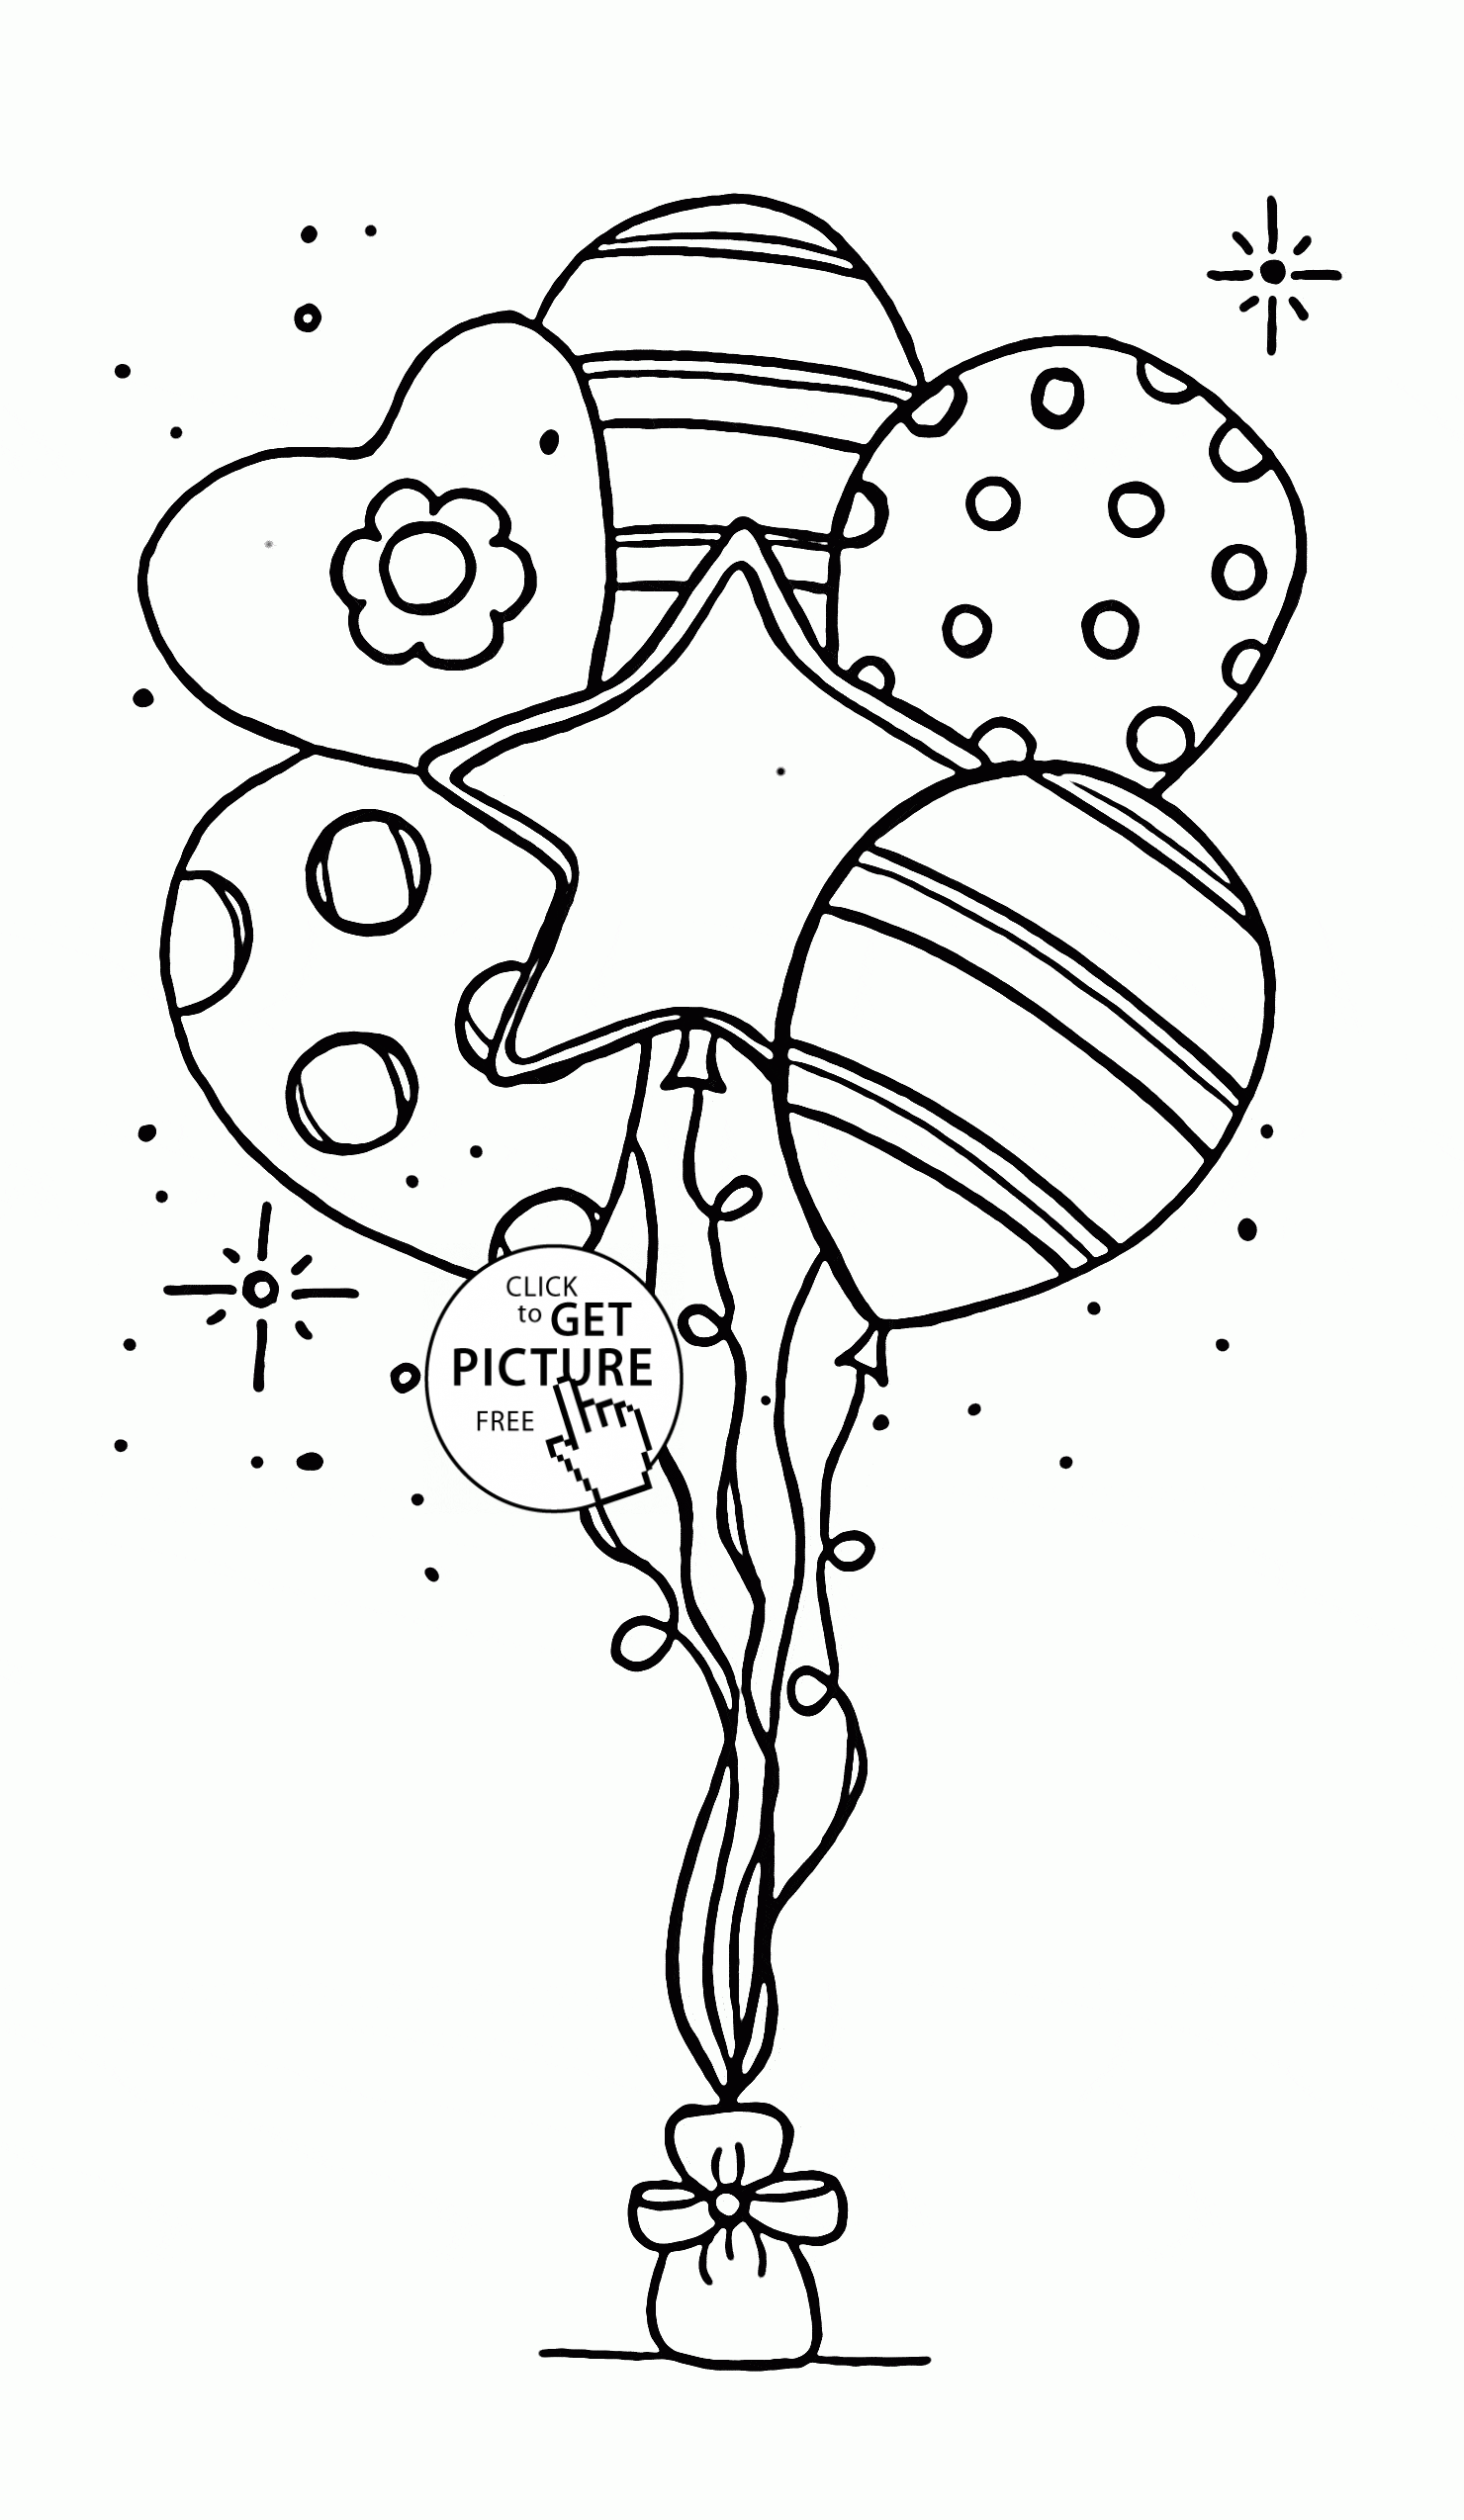 free-printable-birthday-coloring-pages-for-adults-58-best-images